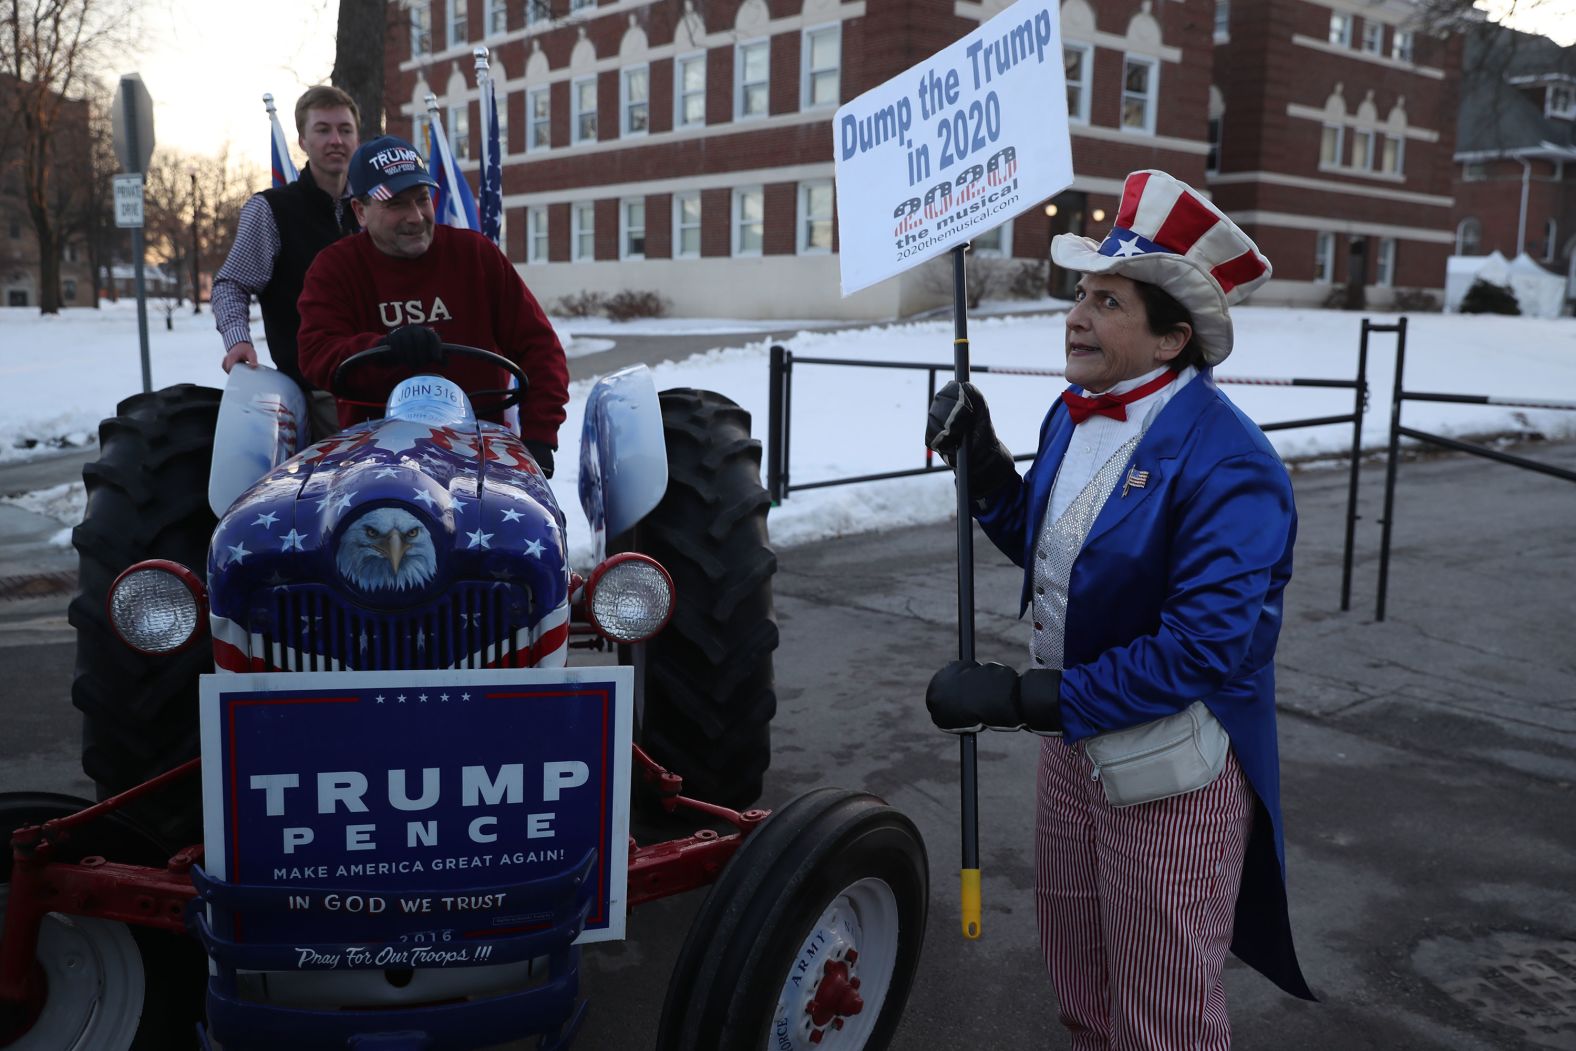 Anti-Trump protester Carol Dunitz faces pro-Trump supporters Gary Leffler, center, and Nathan Montgomery on Tuesday.